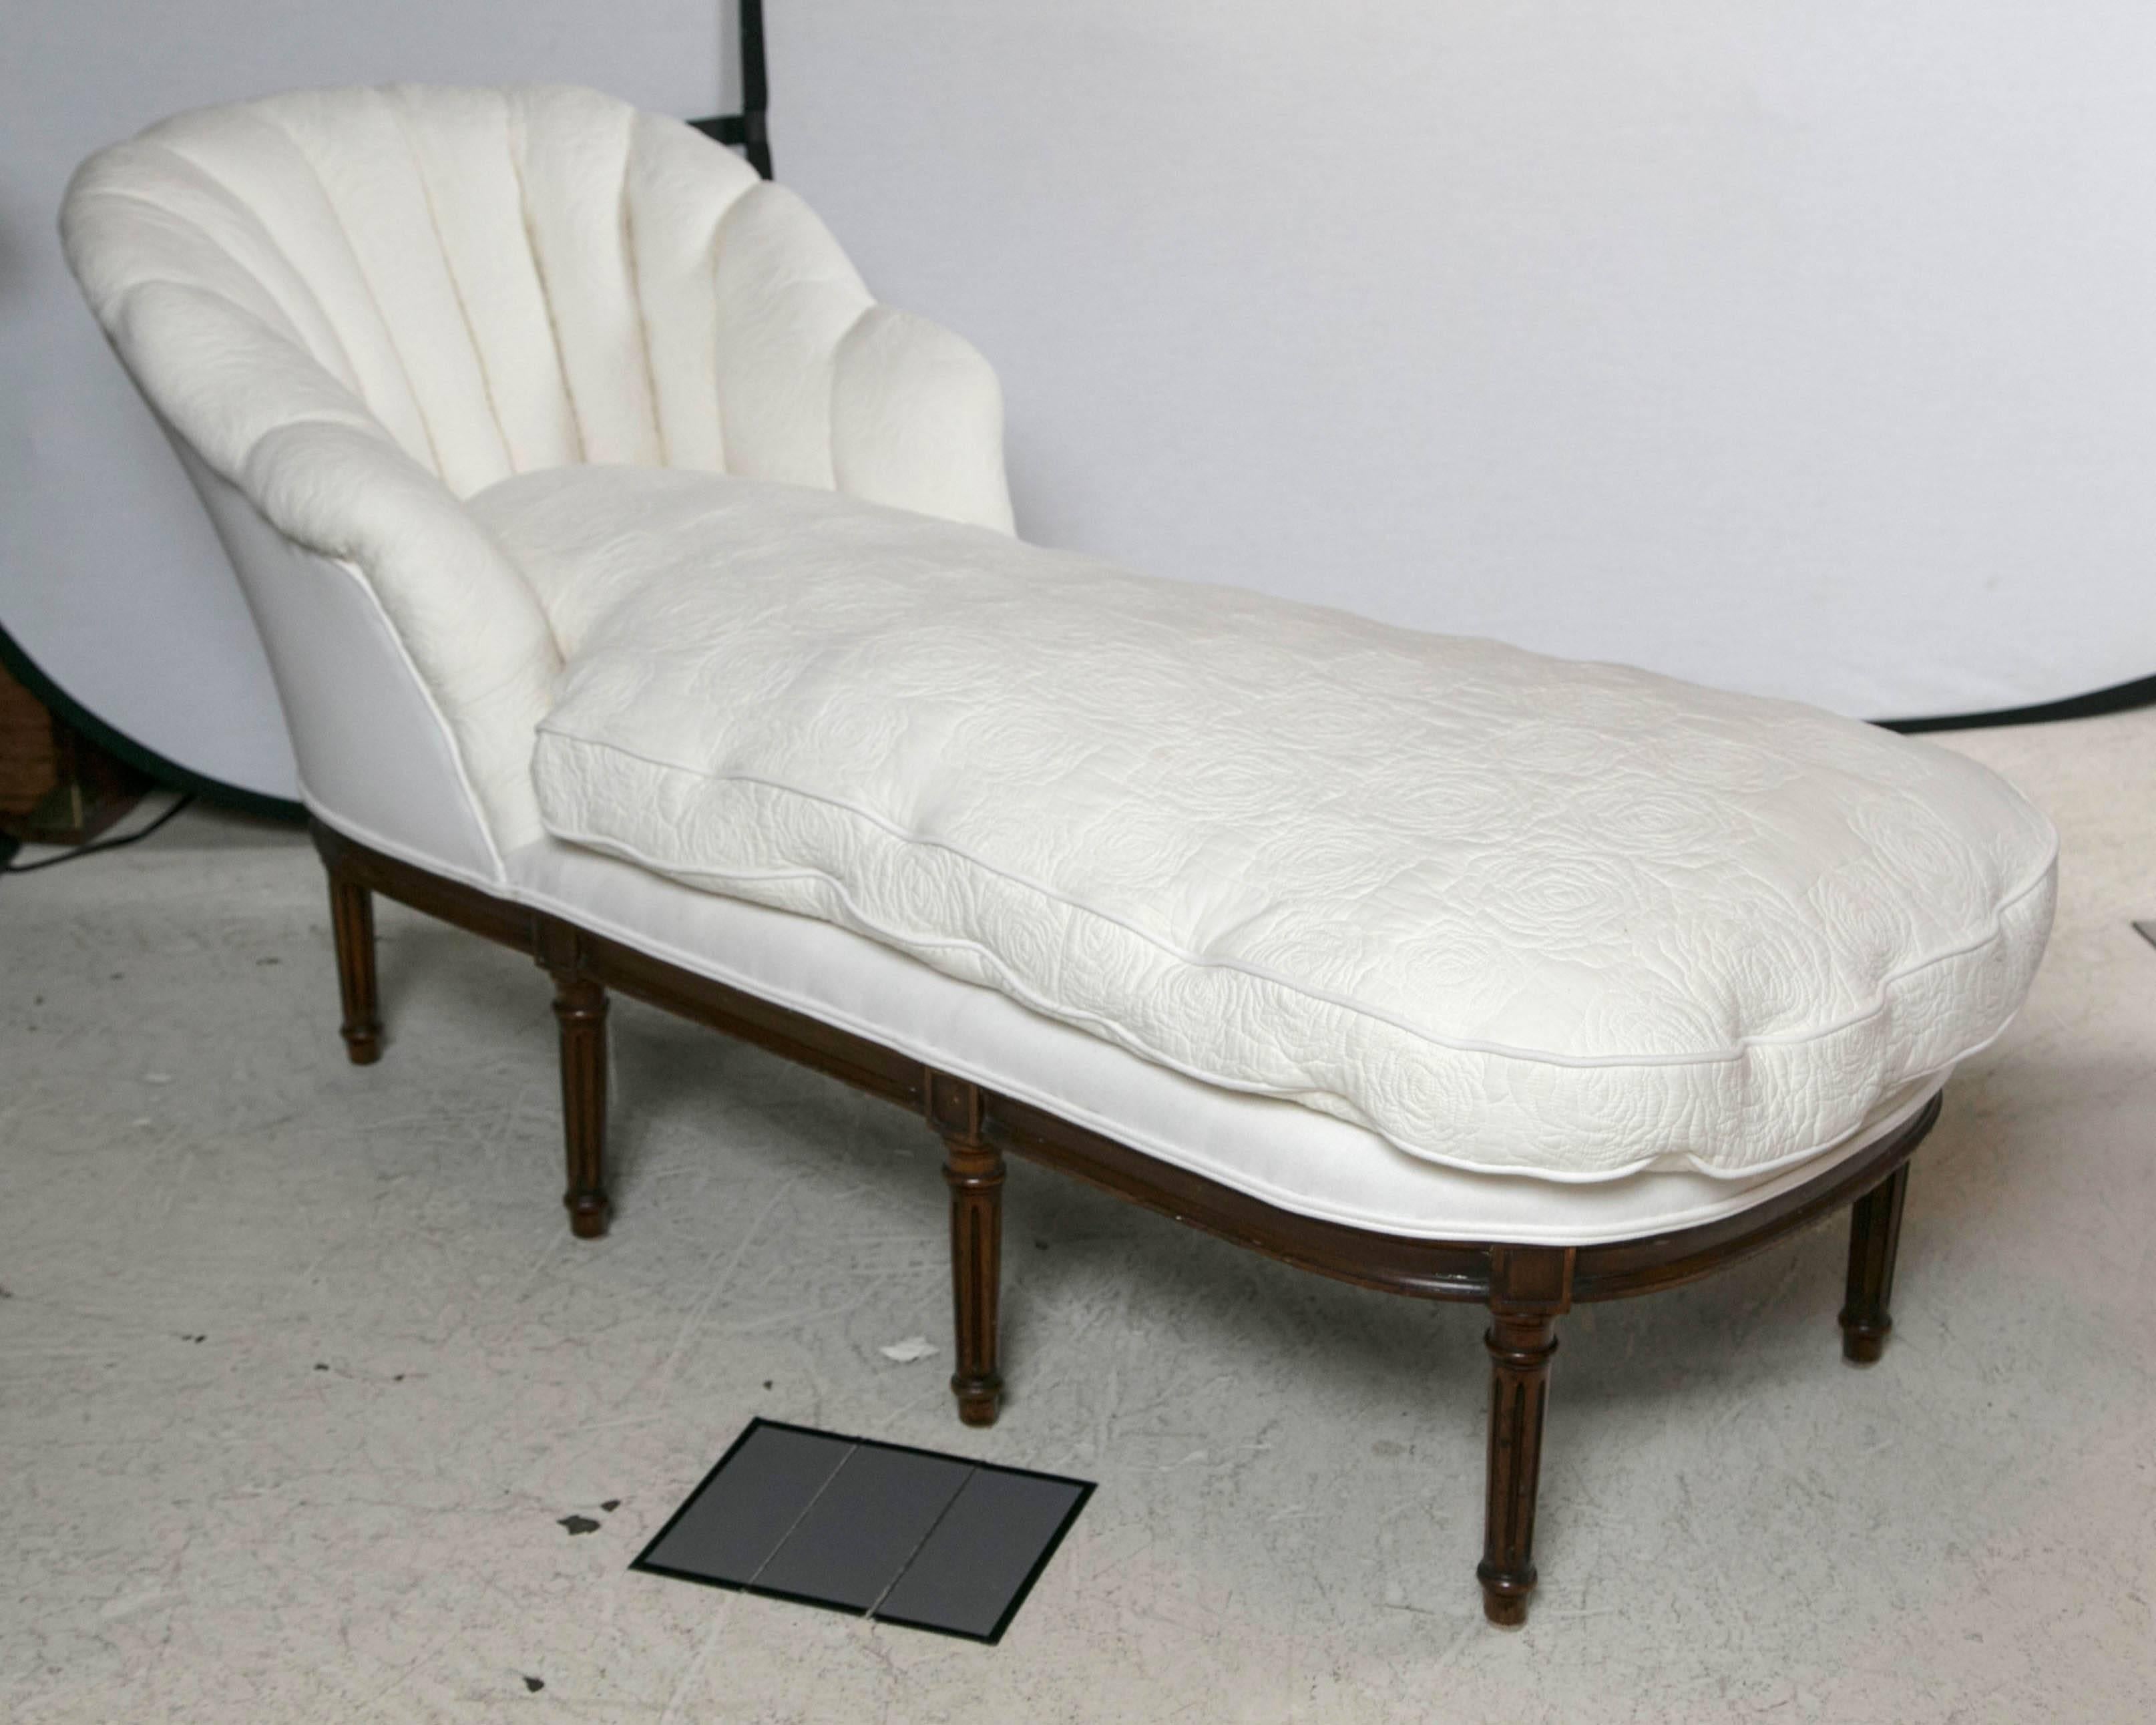 A 19th century French chaise longue. Down filled and newly reupholstered in white linen and antique white on white stitched floral quilt fabric. Fan shaped back.